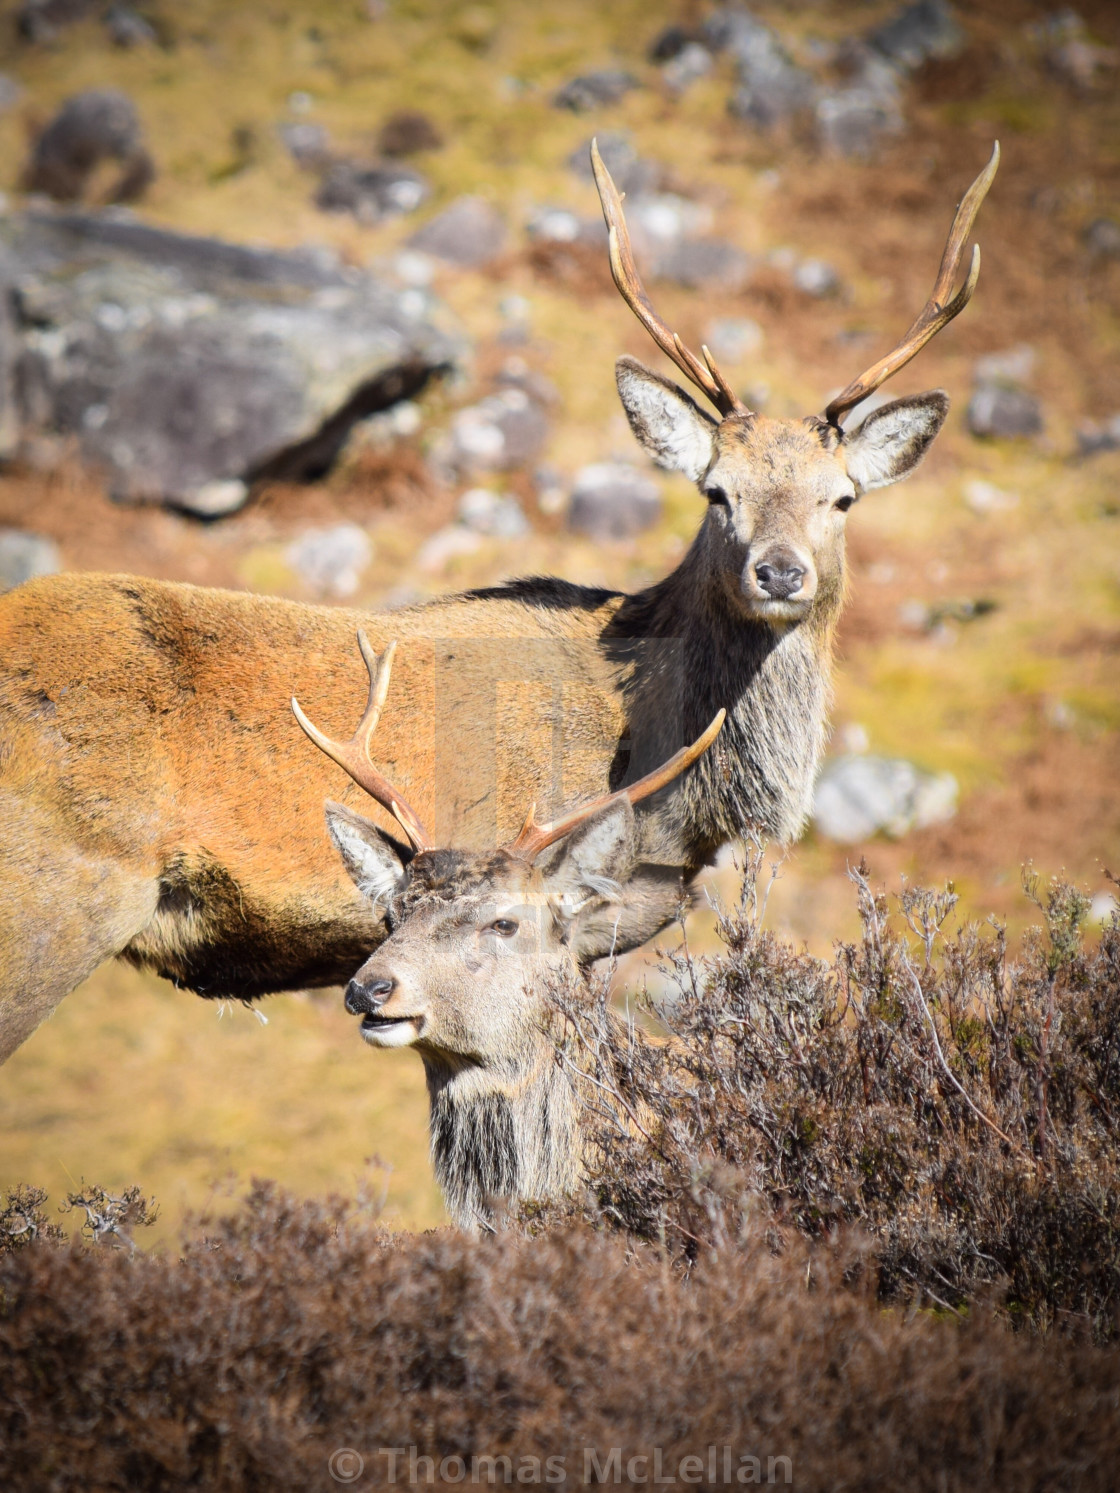 "Wild Stags" stock image